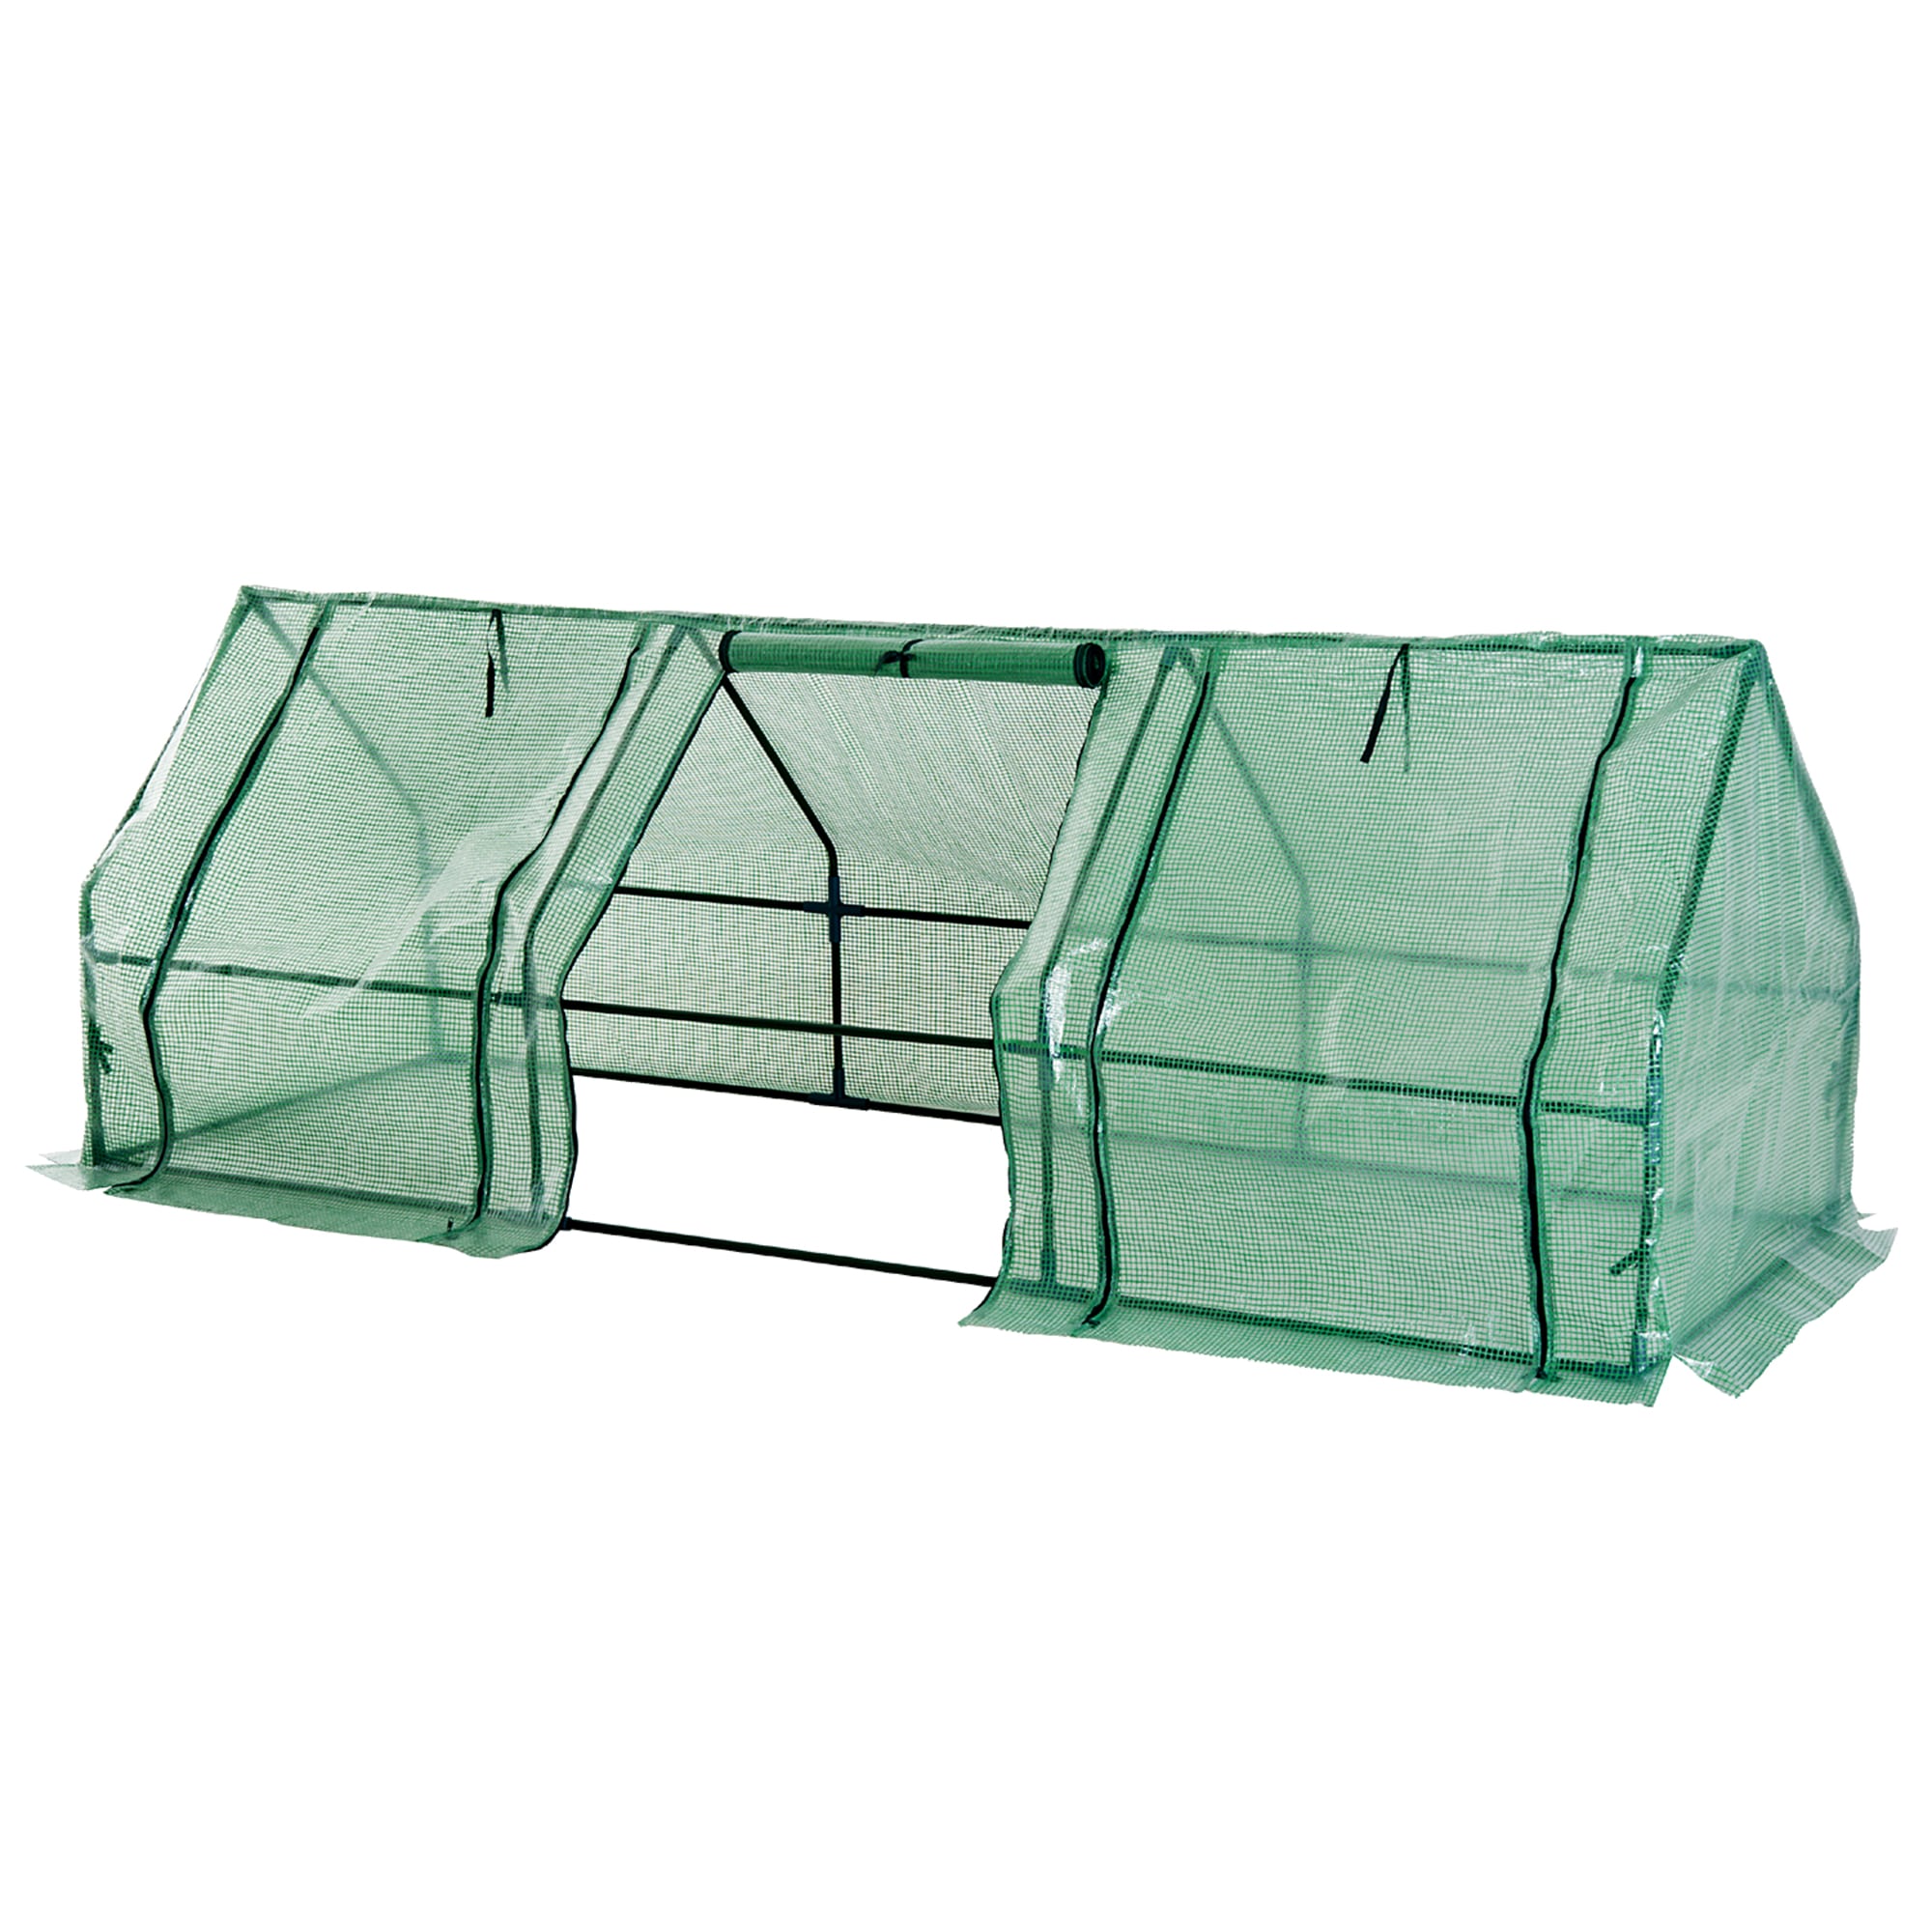 Outsunny 3 x 3 x 4 Garden Portable Pop Up Greenhouse with Side Door & Portable Zipper Bag for Plants & Vegetables 